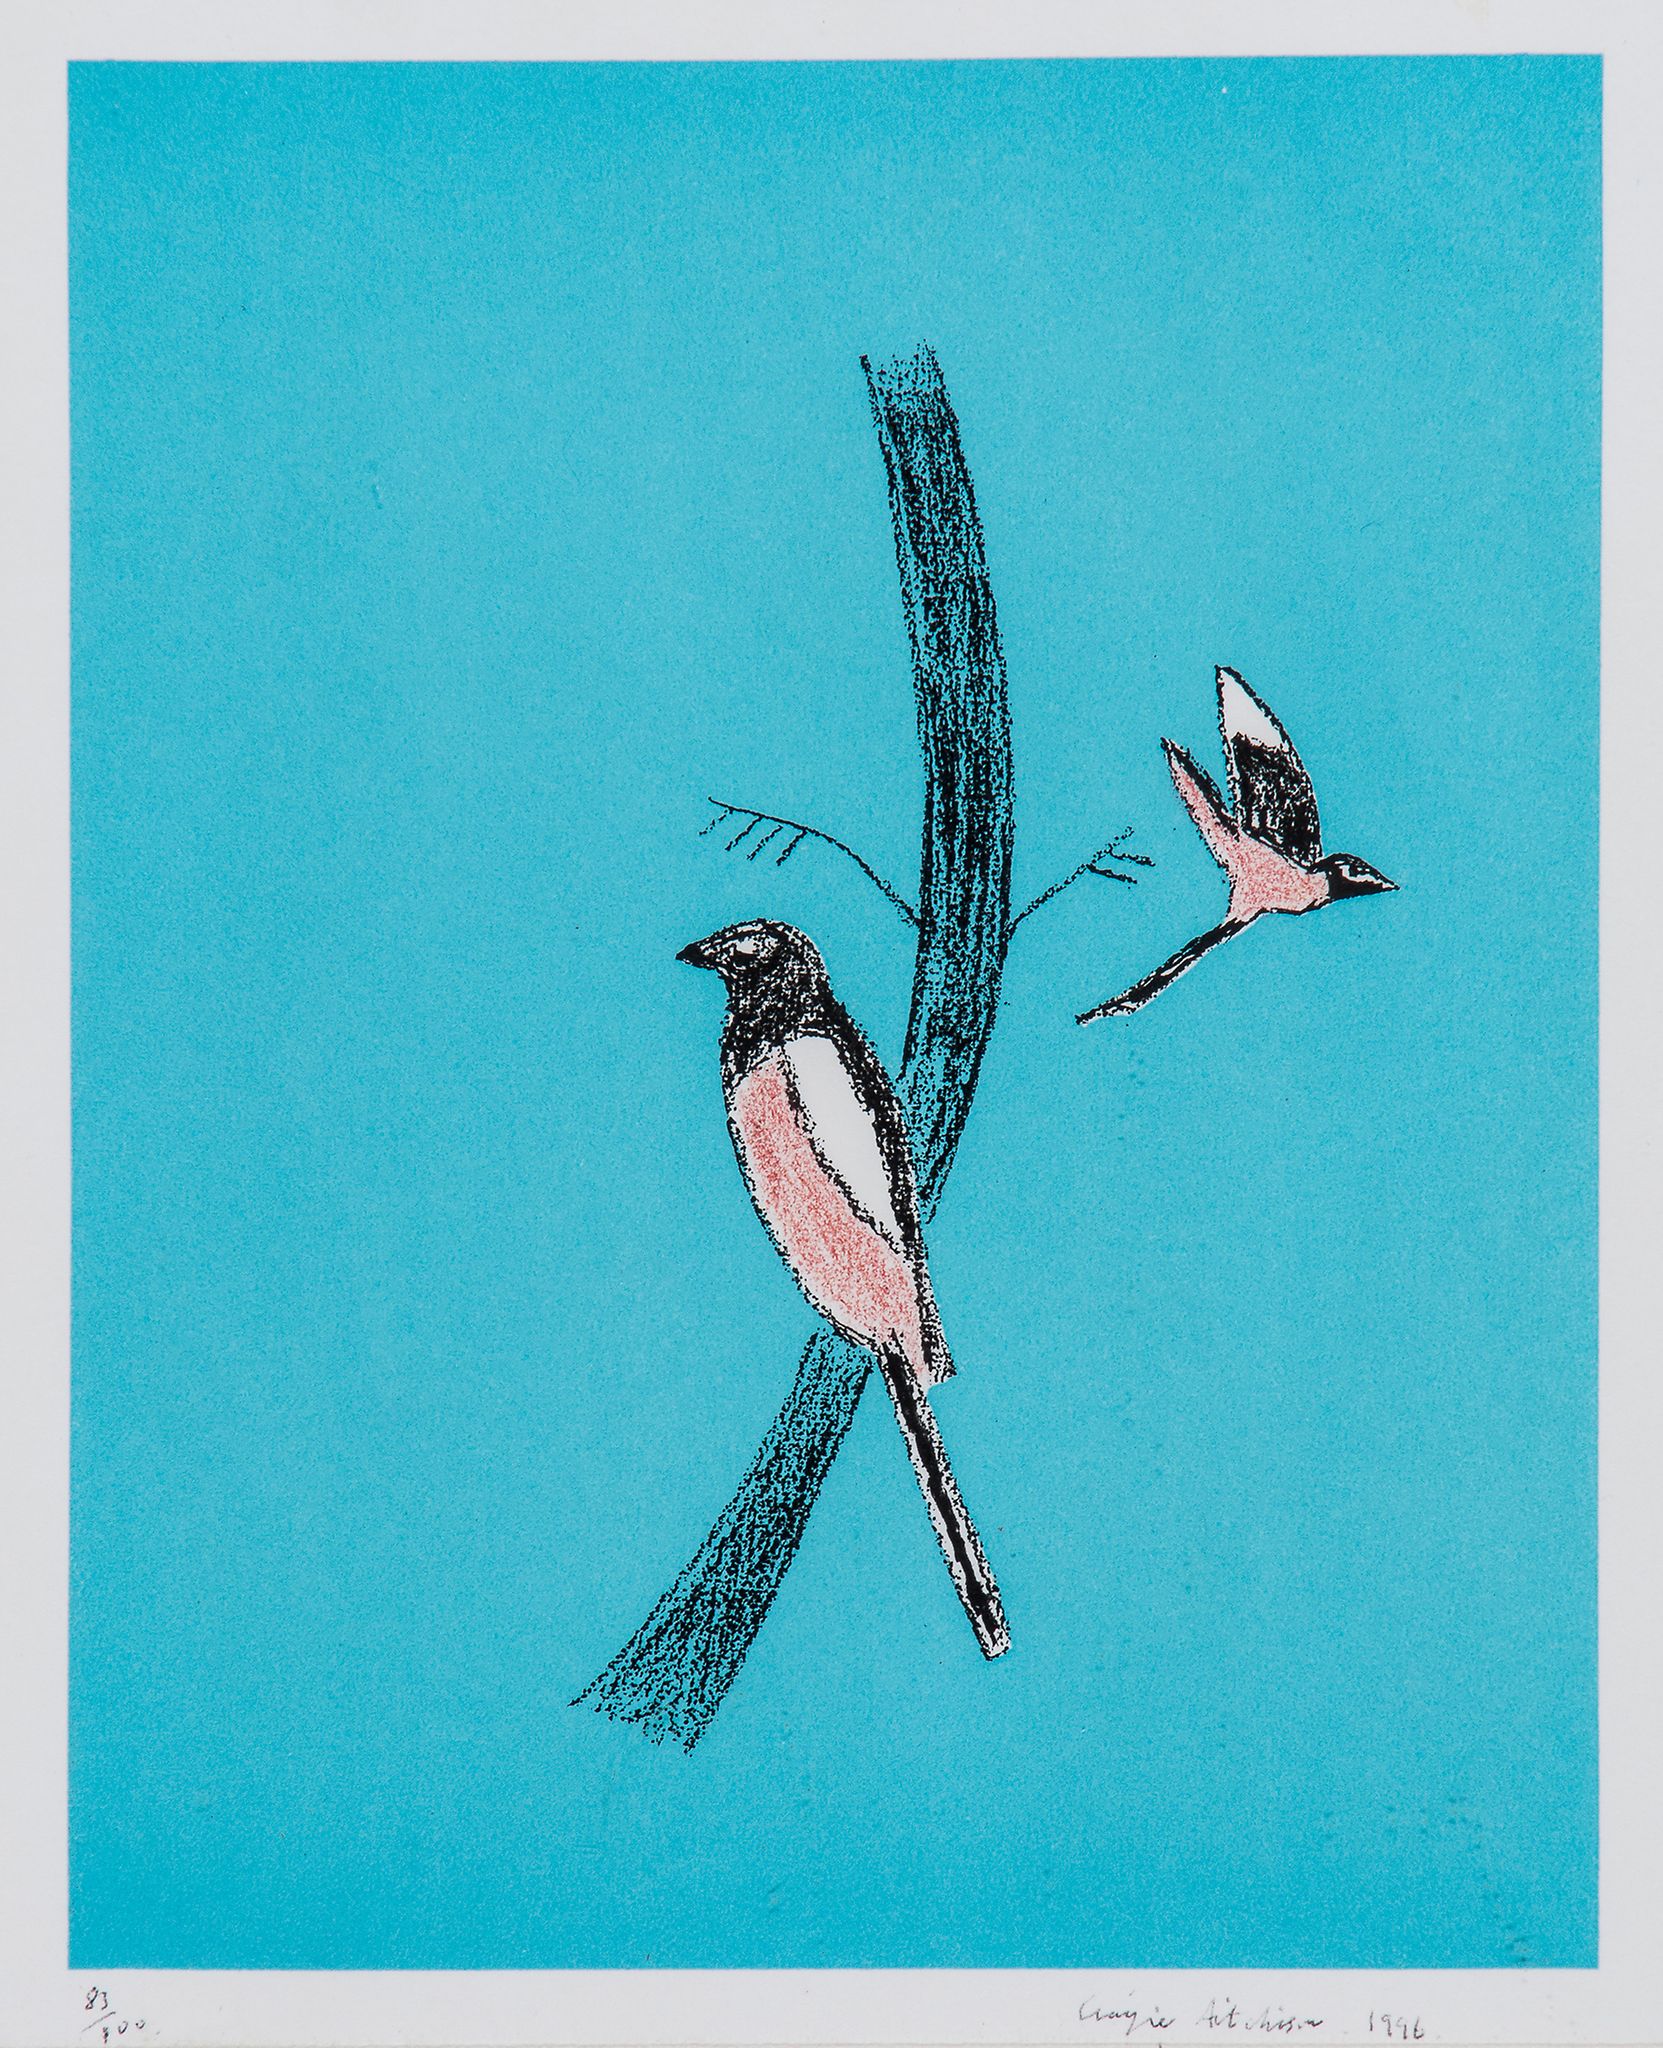 Craigie Aitchison (1926-2009) - Birds lithograph printed in colours, 1996, signed and dated in black